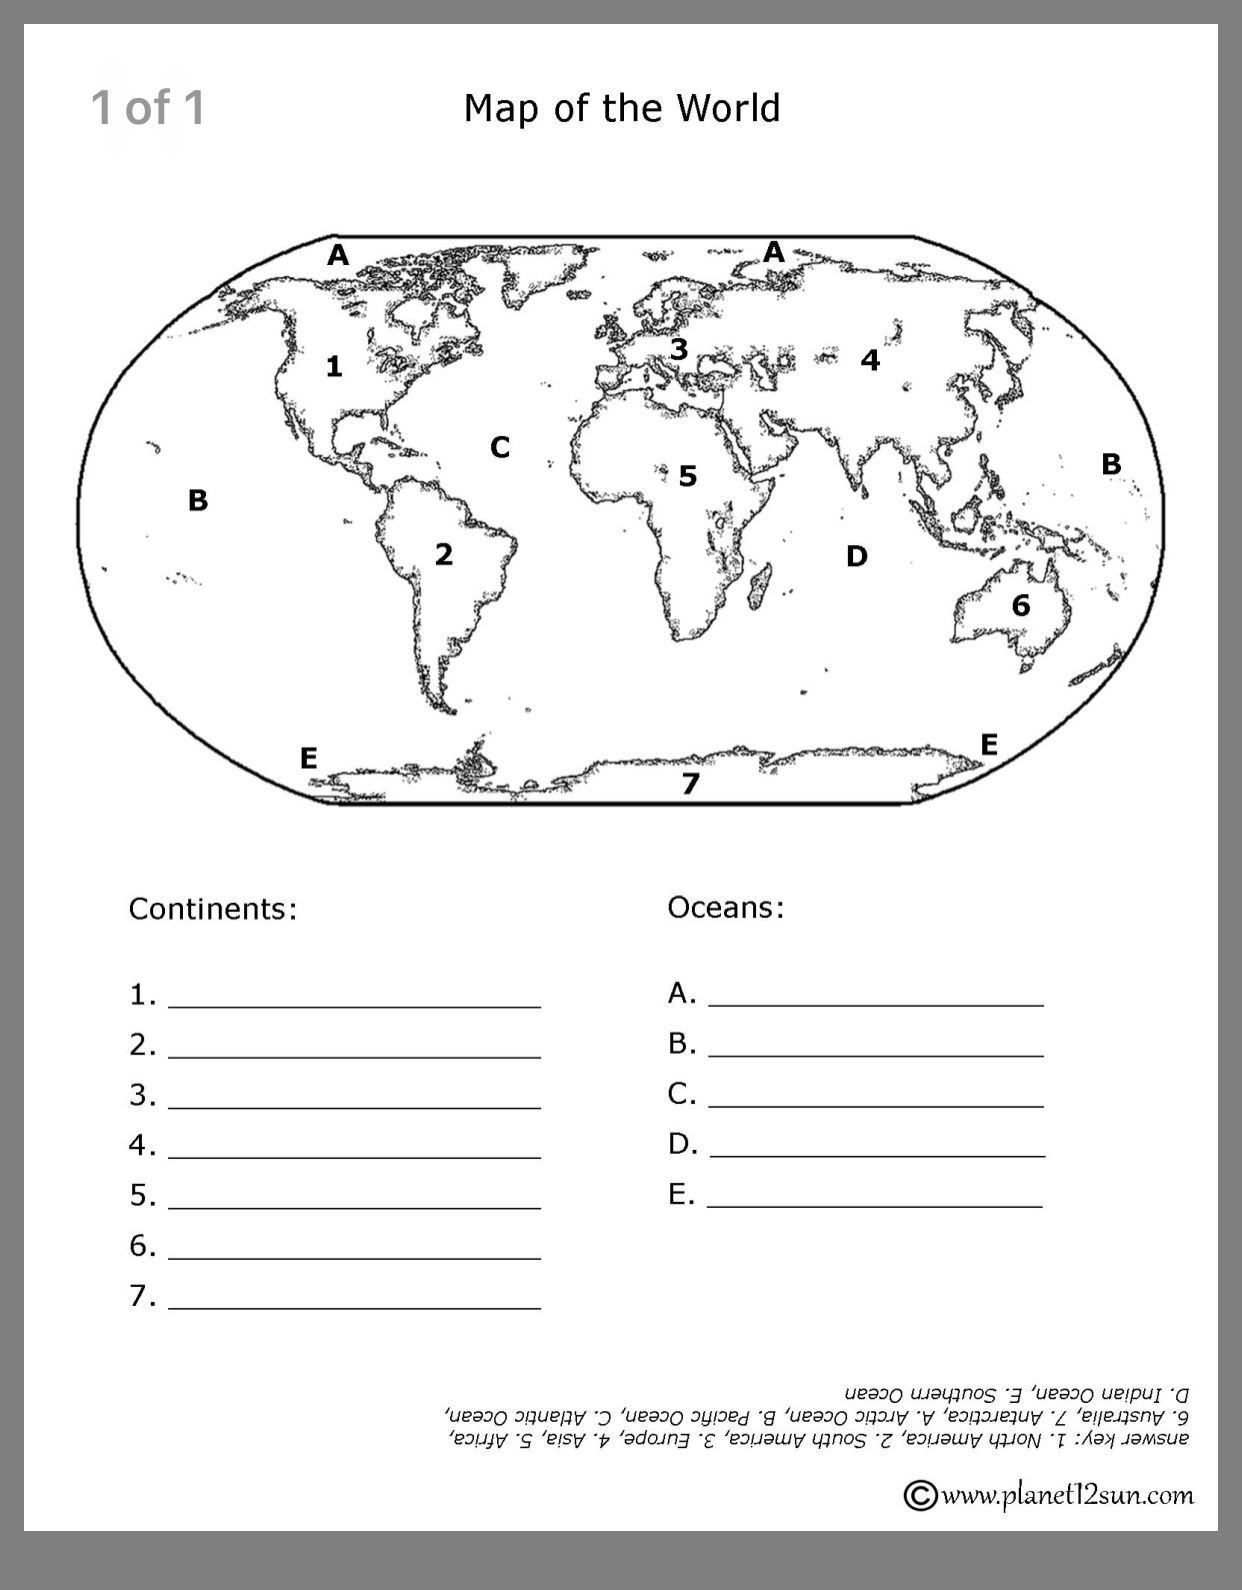 Continents and Oceans Worksheet Pin by Dawn Tran On Geography for Ava with Images